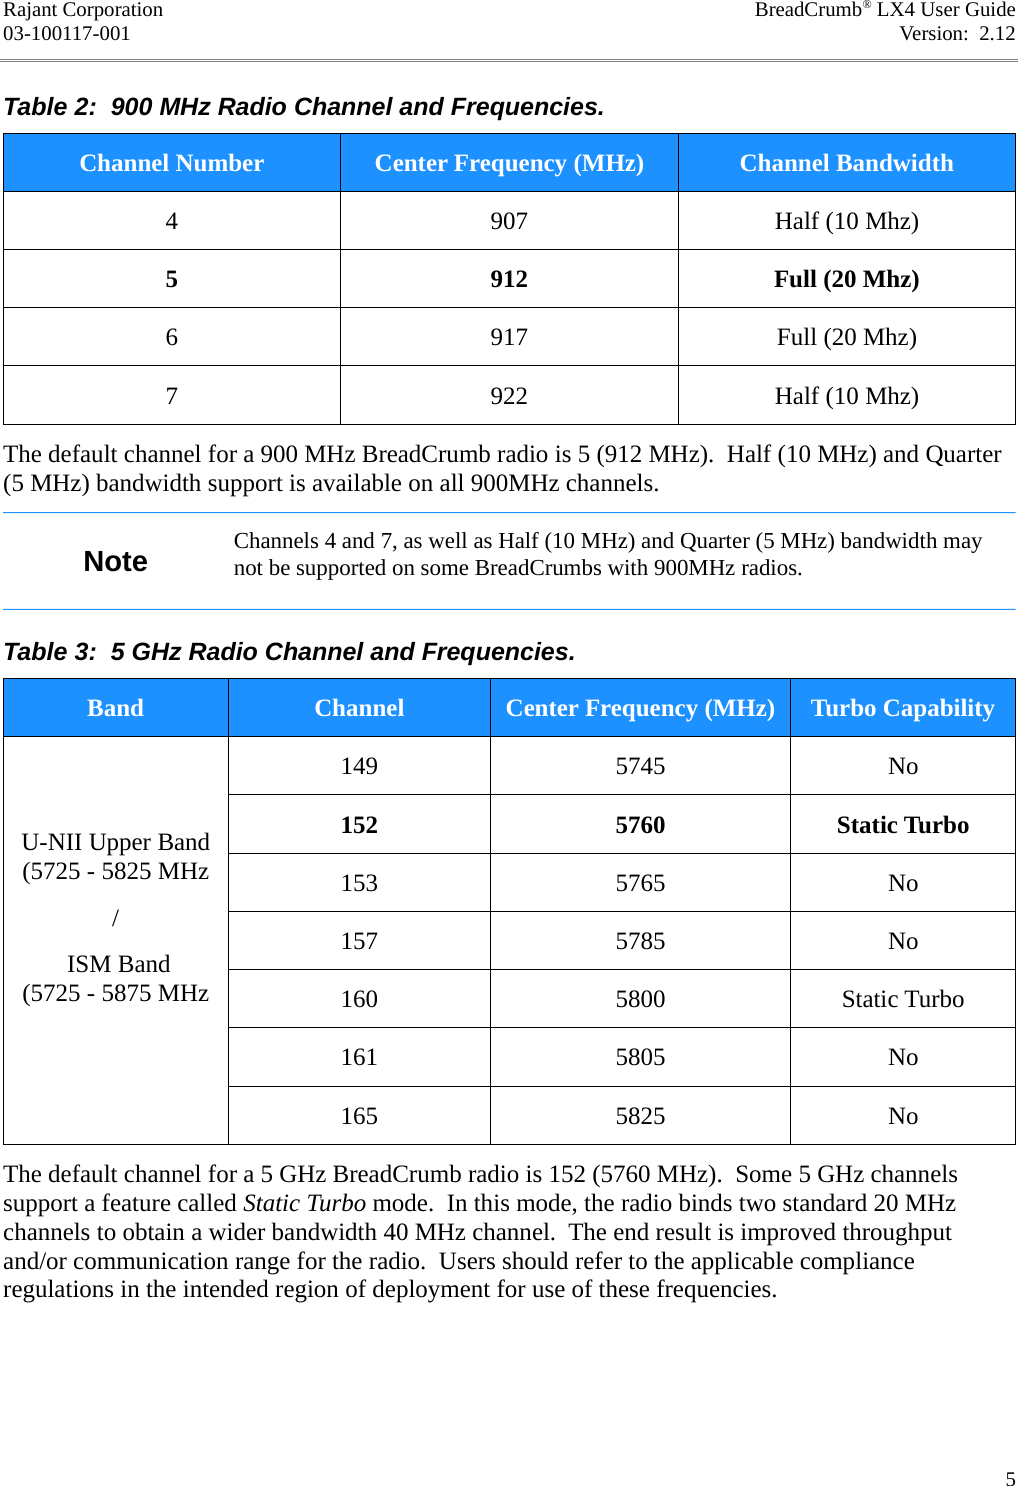 Rajant Corporation BreadCrumb® LX4 User Guide03-100117-001 Version:  2.12Table 2:  900 MHz Radio Channel and Frequencies.Channel Number Center Frequency (MHz) Channel Bandwidth4 907 Half (10 Mhz)5 912 Full (20 Mhz)6 917 Full (20 Mhz)7 922 Half (10 Mhz)The default channel for a 900 MHz BreadCrumb radio is 5 (912 MHz).  Half (10 MHz) and Quarter (5 MHz) bandwidth support is available on all 900MHz channels.Note Channels 4 and 7, as well as Half (10 MHz) and Quarter (5 MHz) bandwidth may not be supported on some BreadCrumbs with 900MHz radios.Table 3:  5 GHz Radio Channel and Frequencies.Band Channel Center Frequency (MHz) Turbo CapabilityU-NII Upper Band (5725 - 5825 MHz/ ISM Band (5725 - 5875 MHz149 5745 No152 5760 Static Turbo153 5765 No157 5785 No160 5800 Static Turbo161 5805 No165 5825 NoThe default channel for a 5 GHz BreadCrumb radio is 152 (5760 MHz).  Some 5 GHz channels support a feature called Static Turbo mode.  In this mode, the radio binds two standard 20 MHz channels to obtain a wider bandwidth 40 MHz channel.  The end result is improved throughput and/or communication range for the radio.  Users should refer to the applicable compliance regulations in the intended region of deployment for use of these frequencies.5